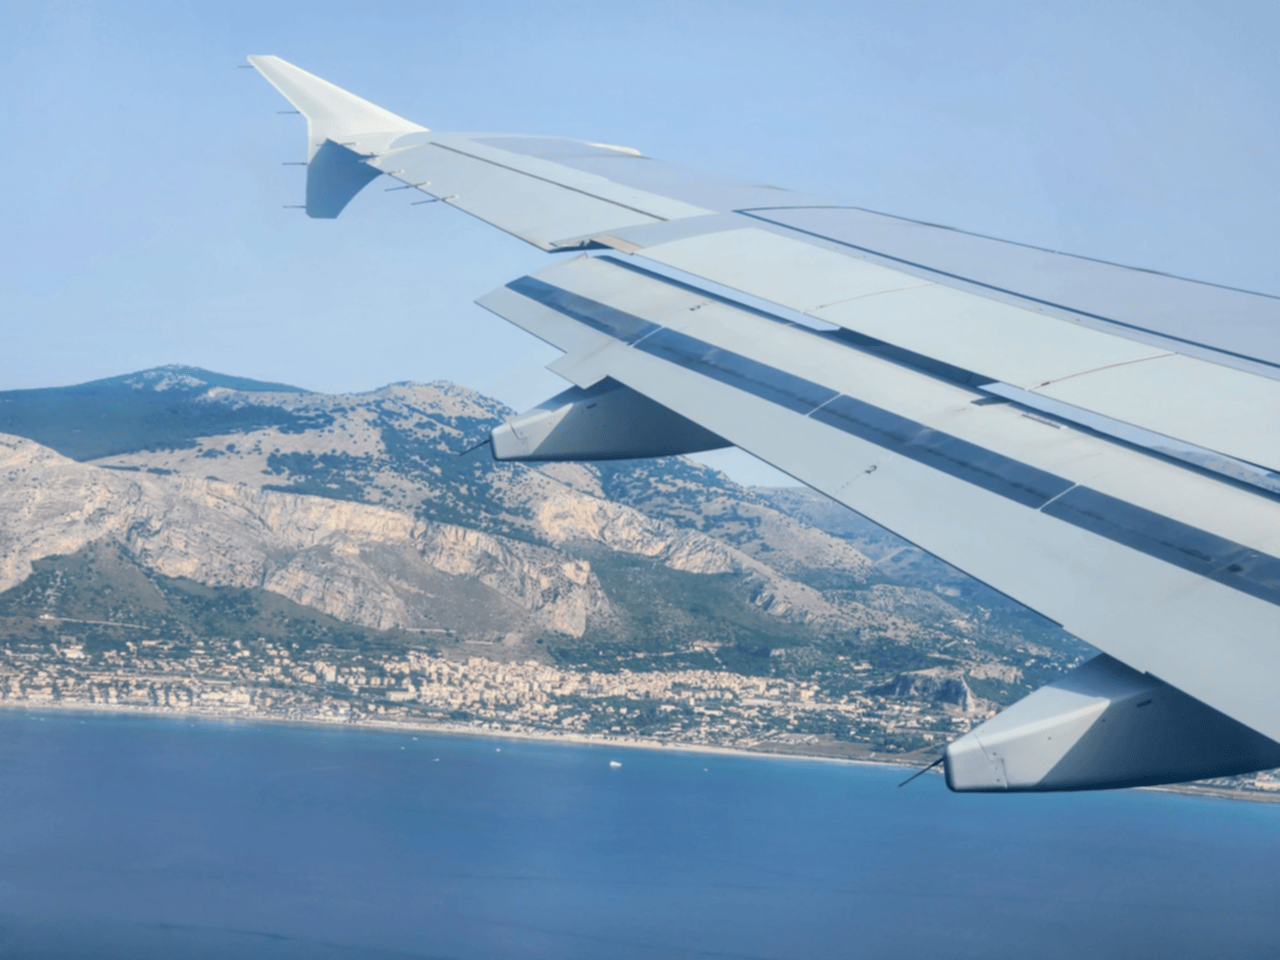 Arriving to Sicily